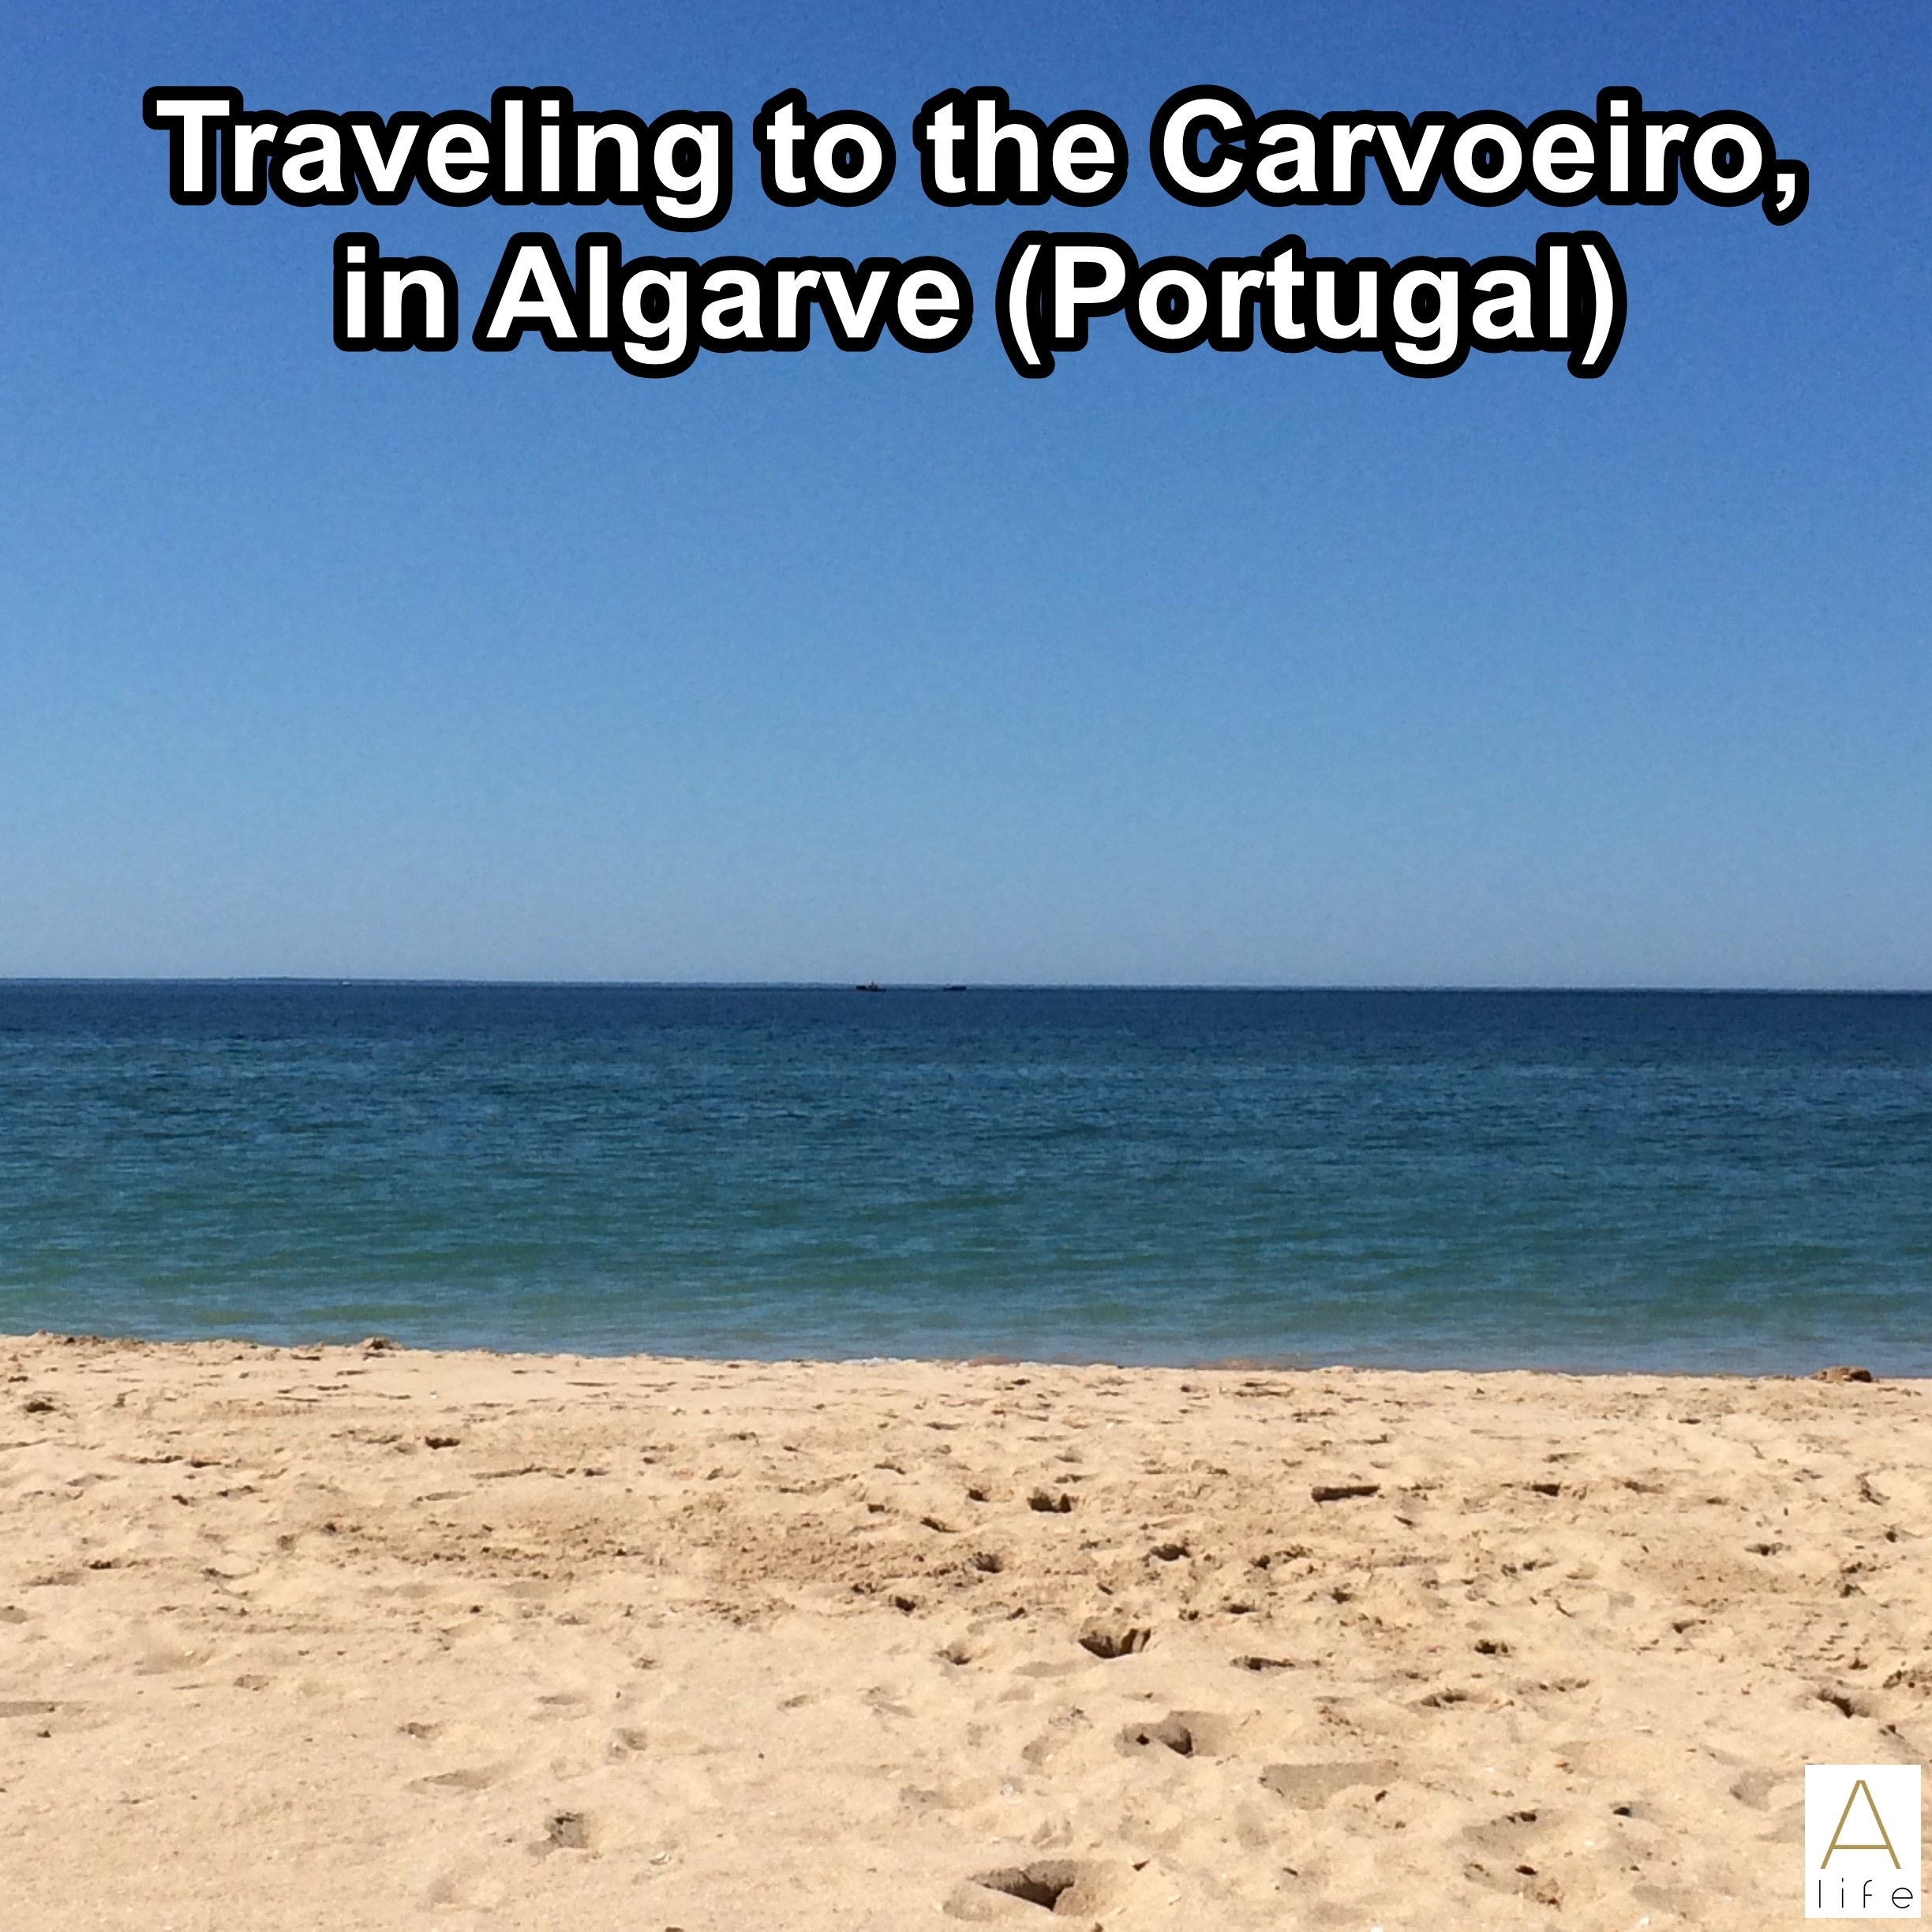 Traveling to the Carvoeiro, in Algarve (Portugal)